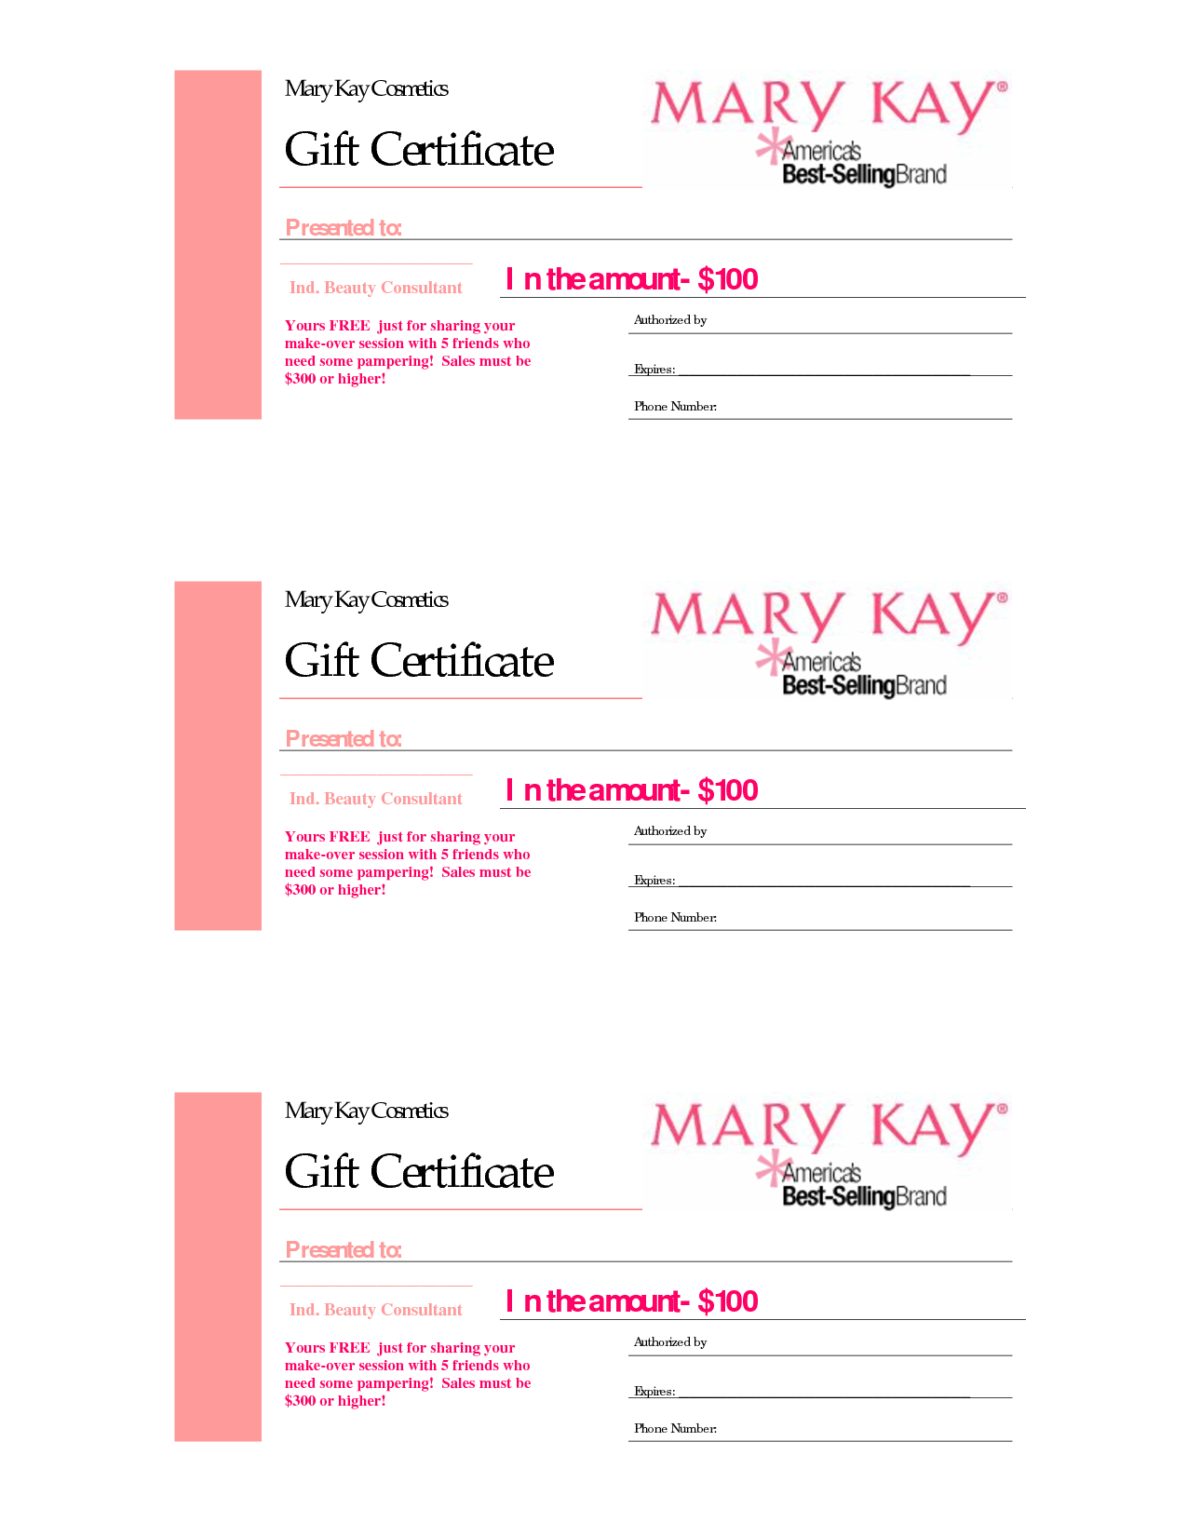 mary-kay-gift-certificate-template-professional-template-examples